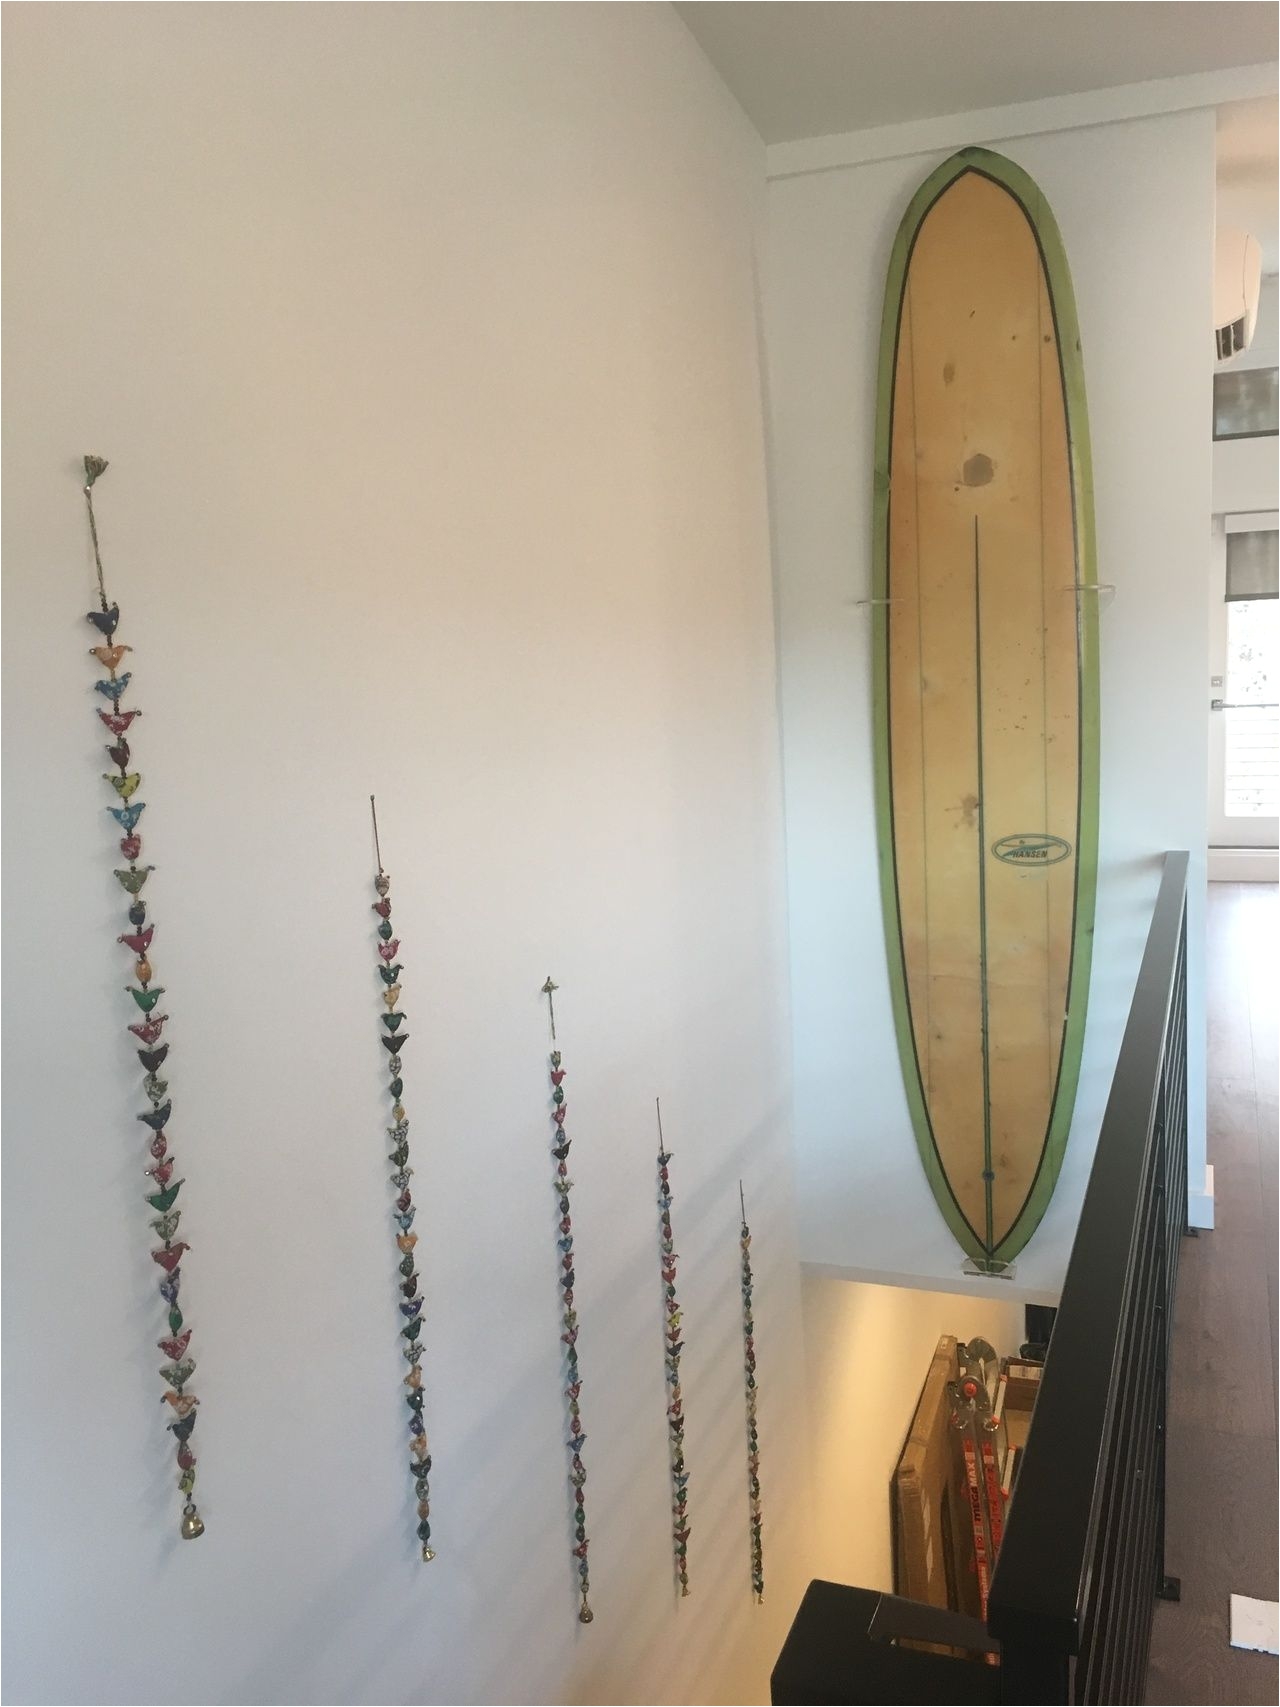 How to Build A Wall Mounted Surfboard Rack Vertical Surfboard Display Rack Clear Acrylic Wall Mount